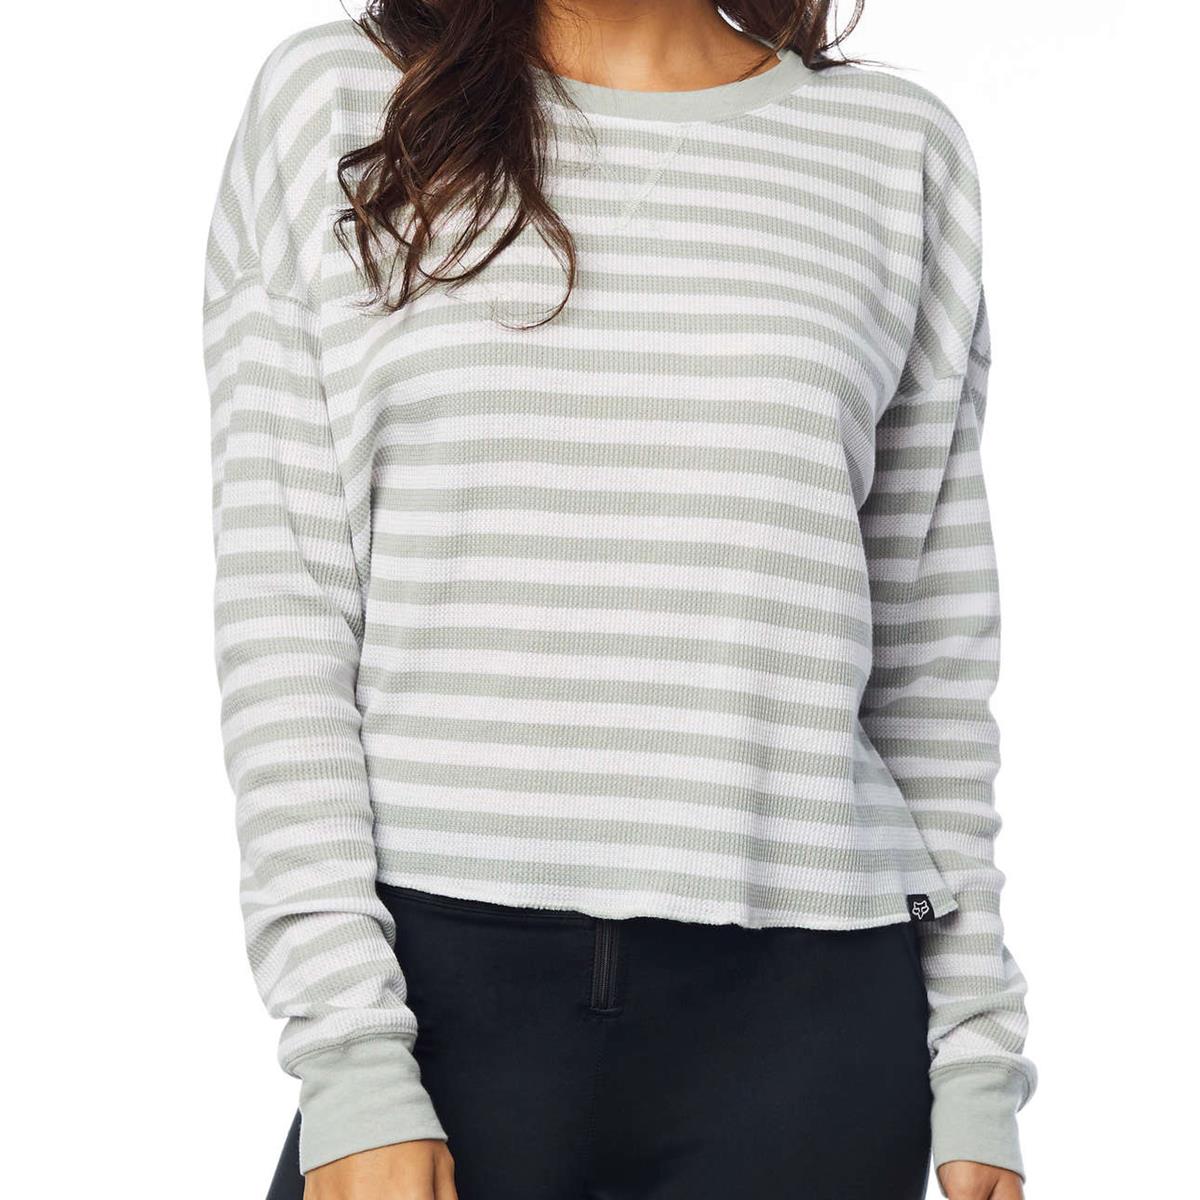 Fox Girls Longsleeve Shirt Striped Out Thermal White